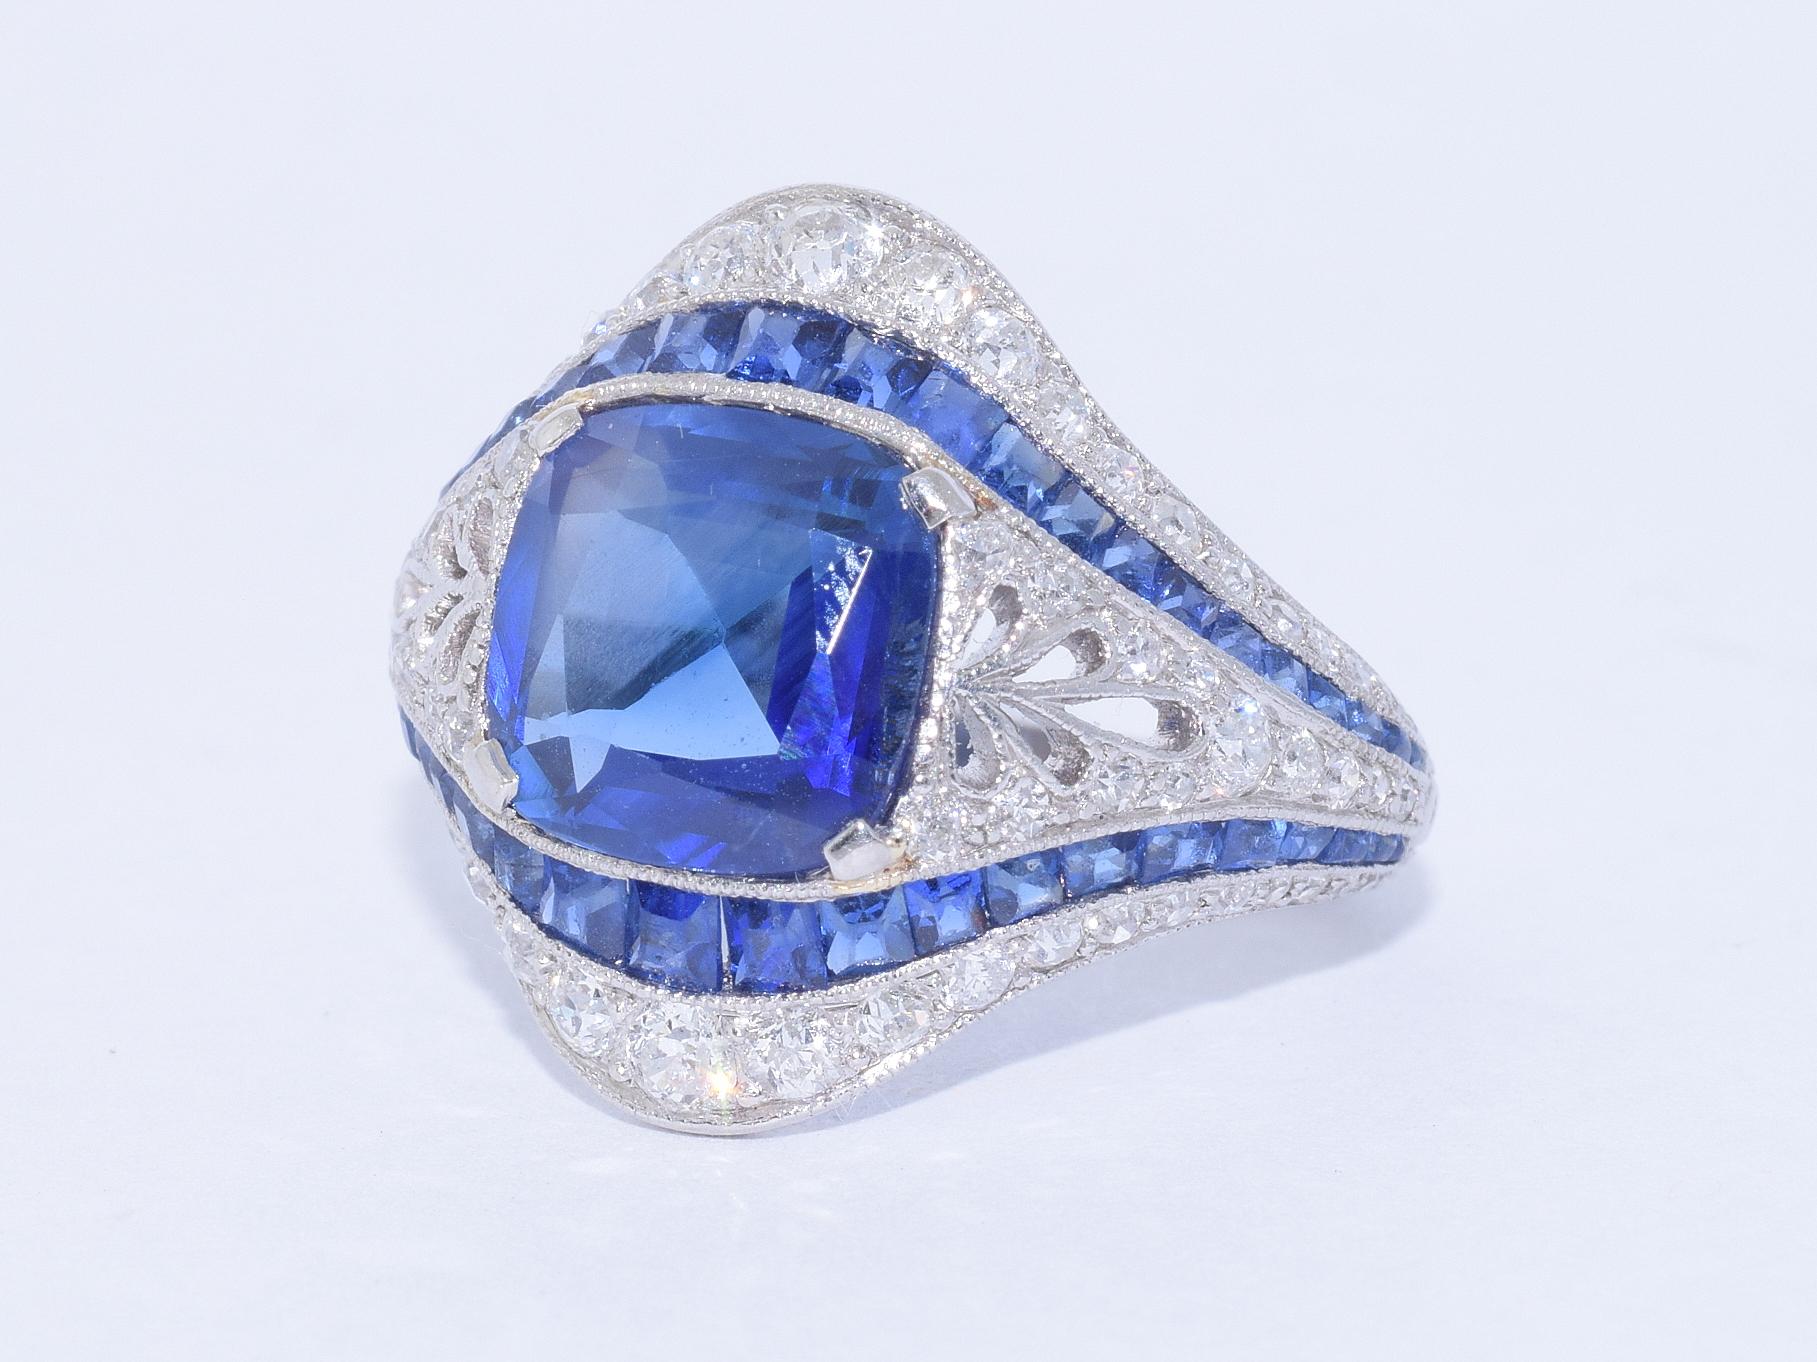 A cushion sapphire weighing 2.80 carats, with gemological report stating there are no indications of heat treatment, is set in a platinum mounting with pierced details accented with a total of approximately 0.80 carat of round diamonds and calibré